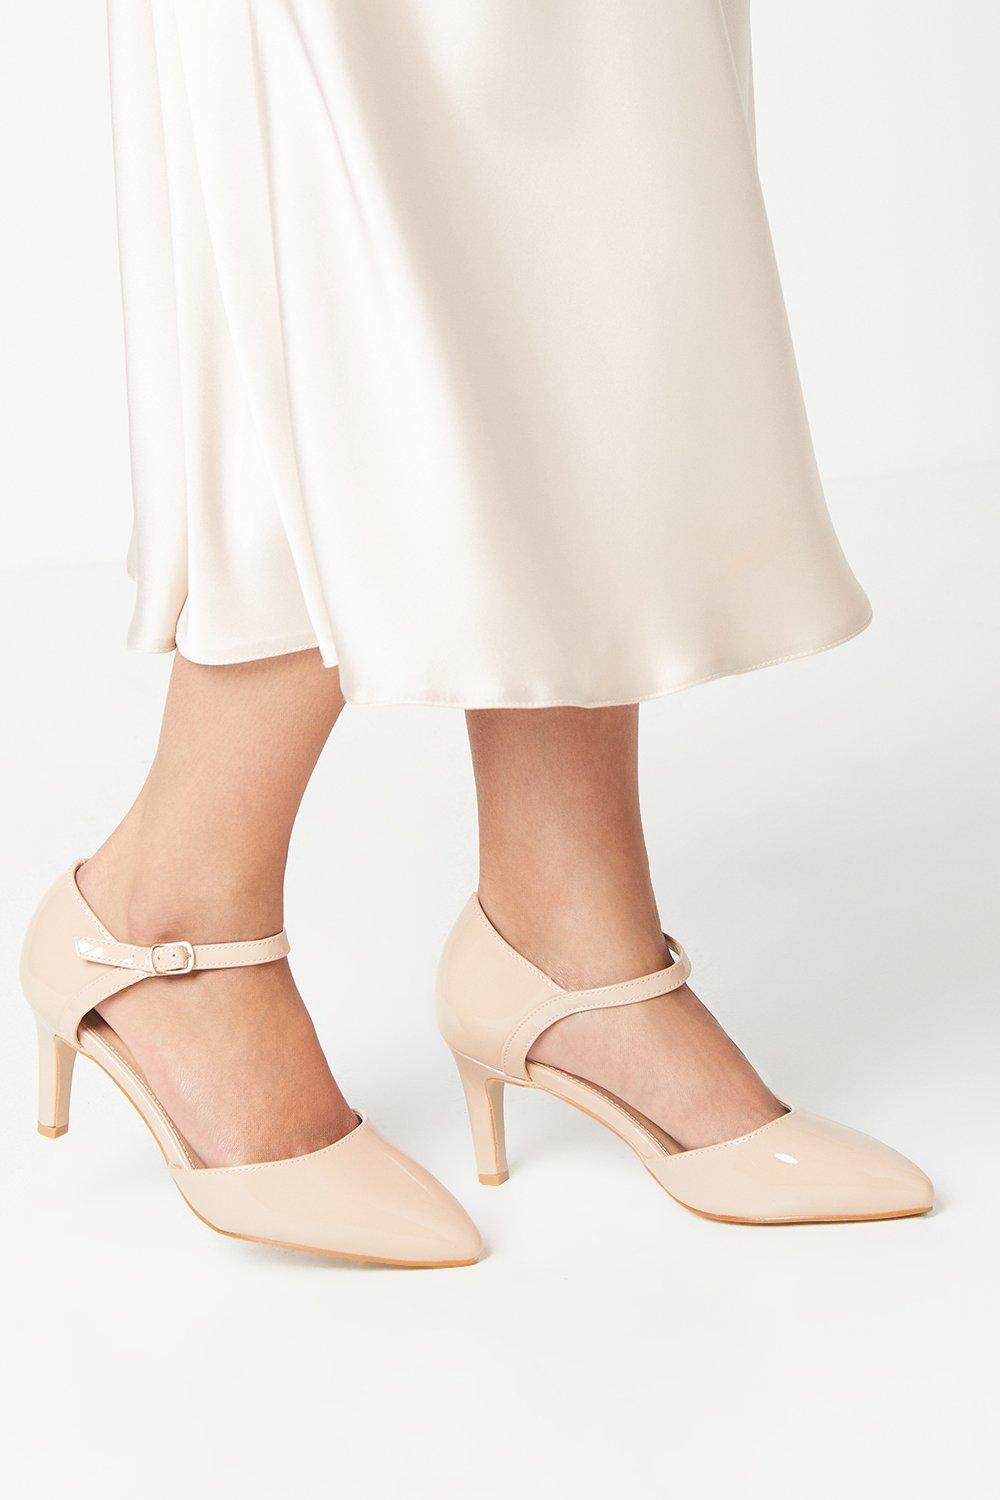 Women’s Good For The Sole: Extra Wide Fit Emmy Court Shoes - blush - 5